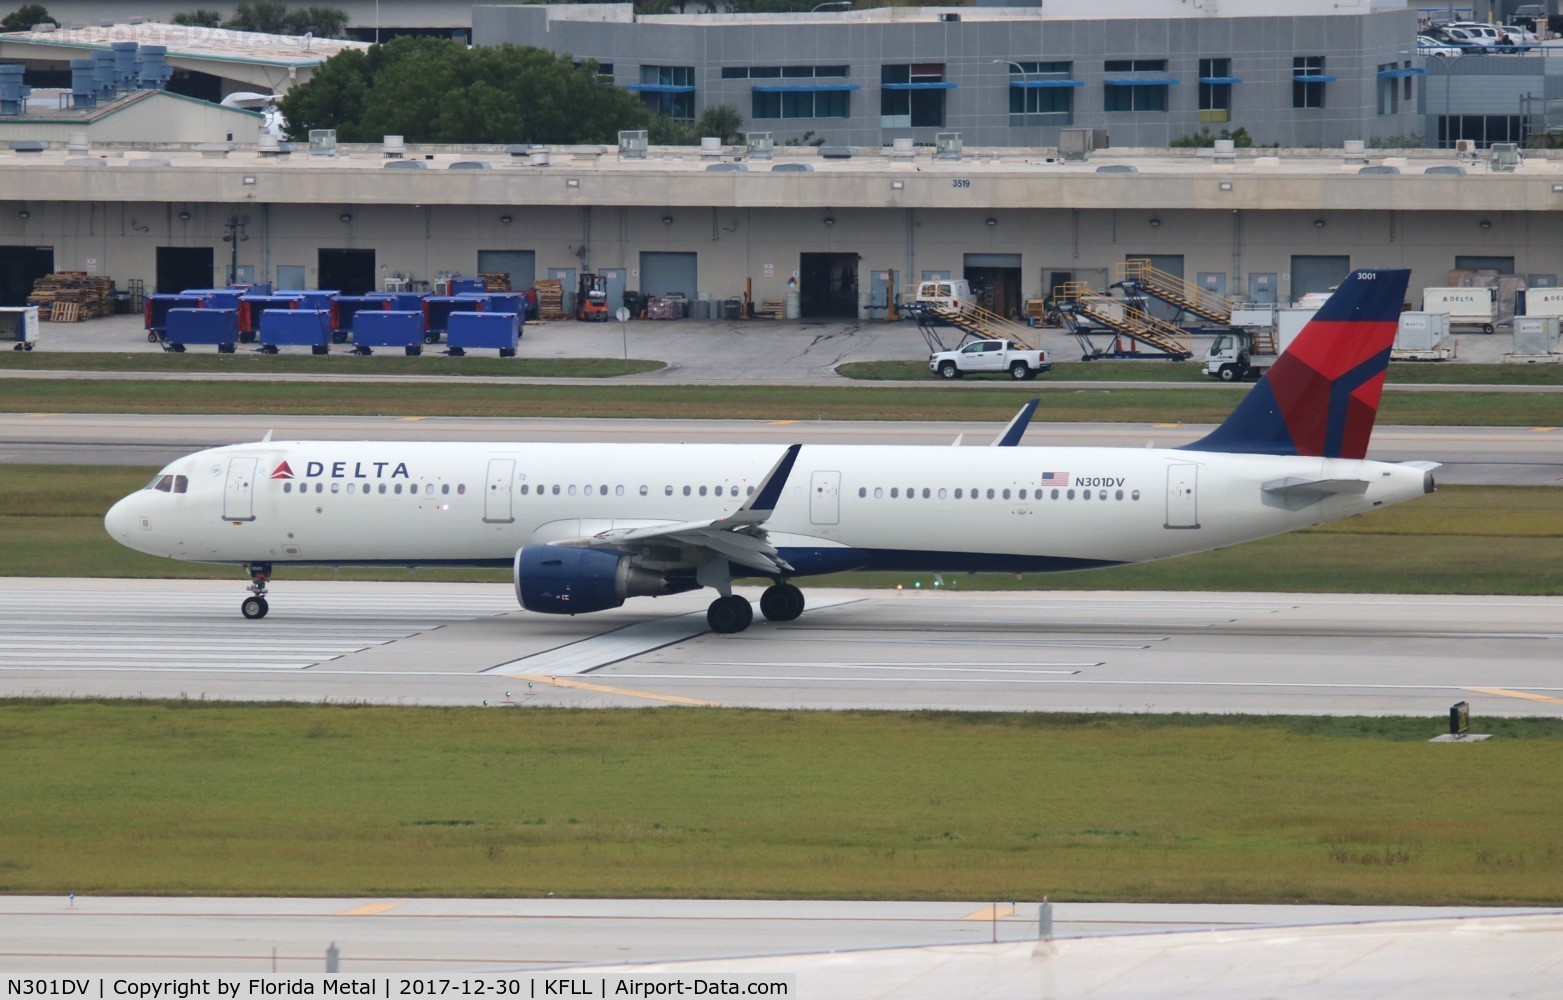 N301DV, 2016 Airbus A321-211 C/N 6923, Registration was changed to DV in honor of Dave Vorgias, who flew the first Delta A321 delivery flight in 2016, he died in February 2017